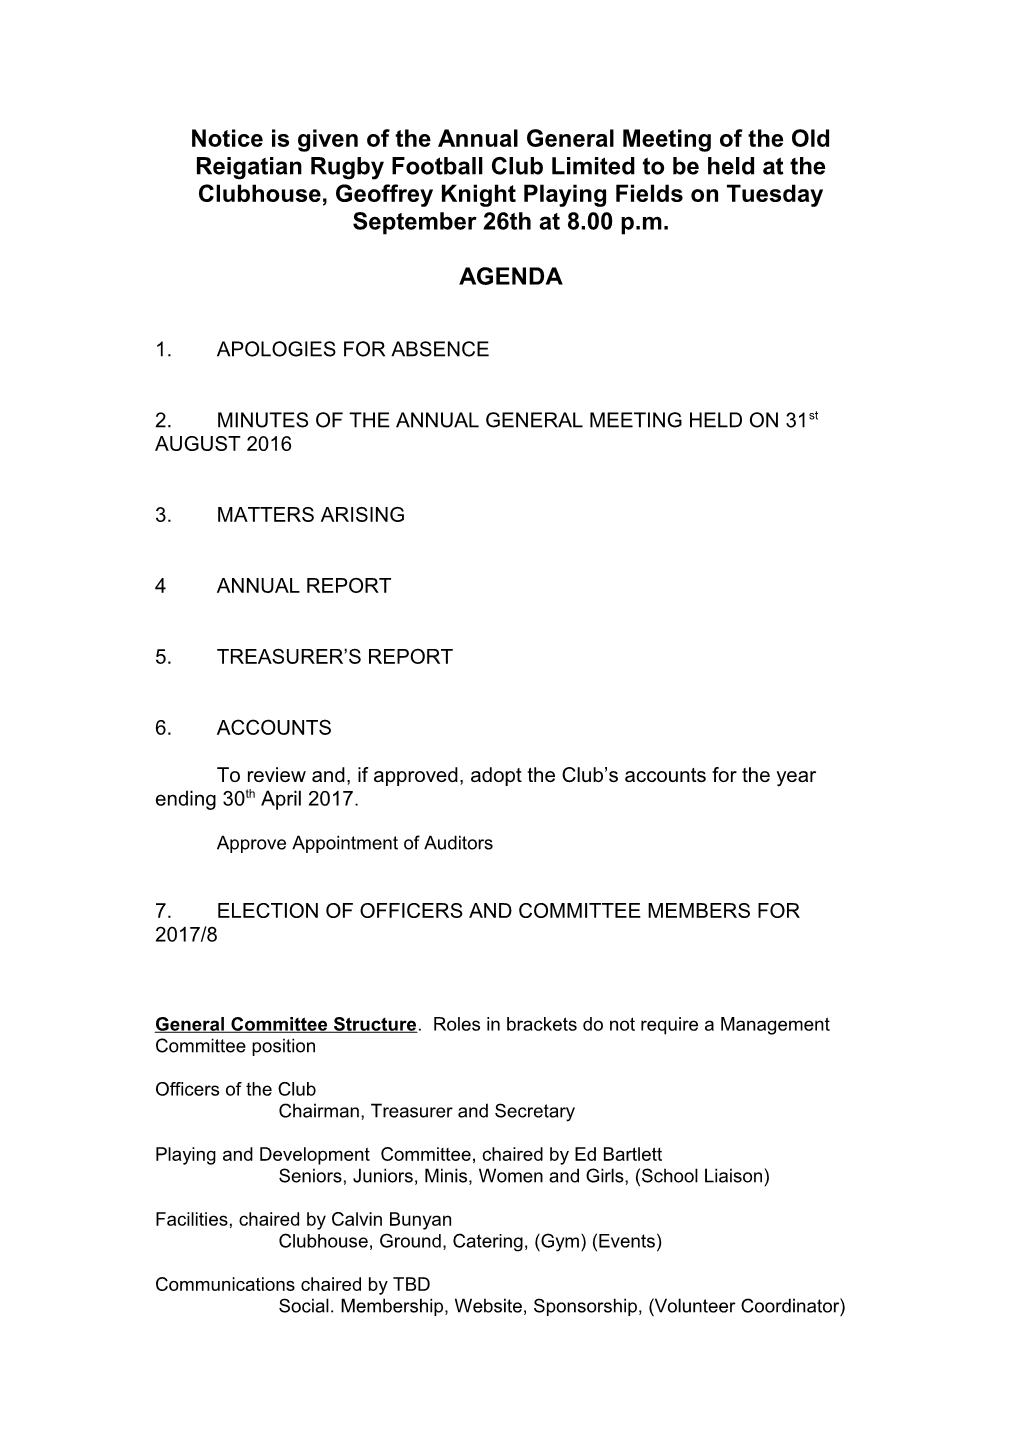 Notice Is Given of the Annual General Meeting of the Old Reigatian Rugby Football Club